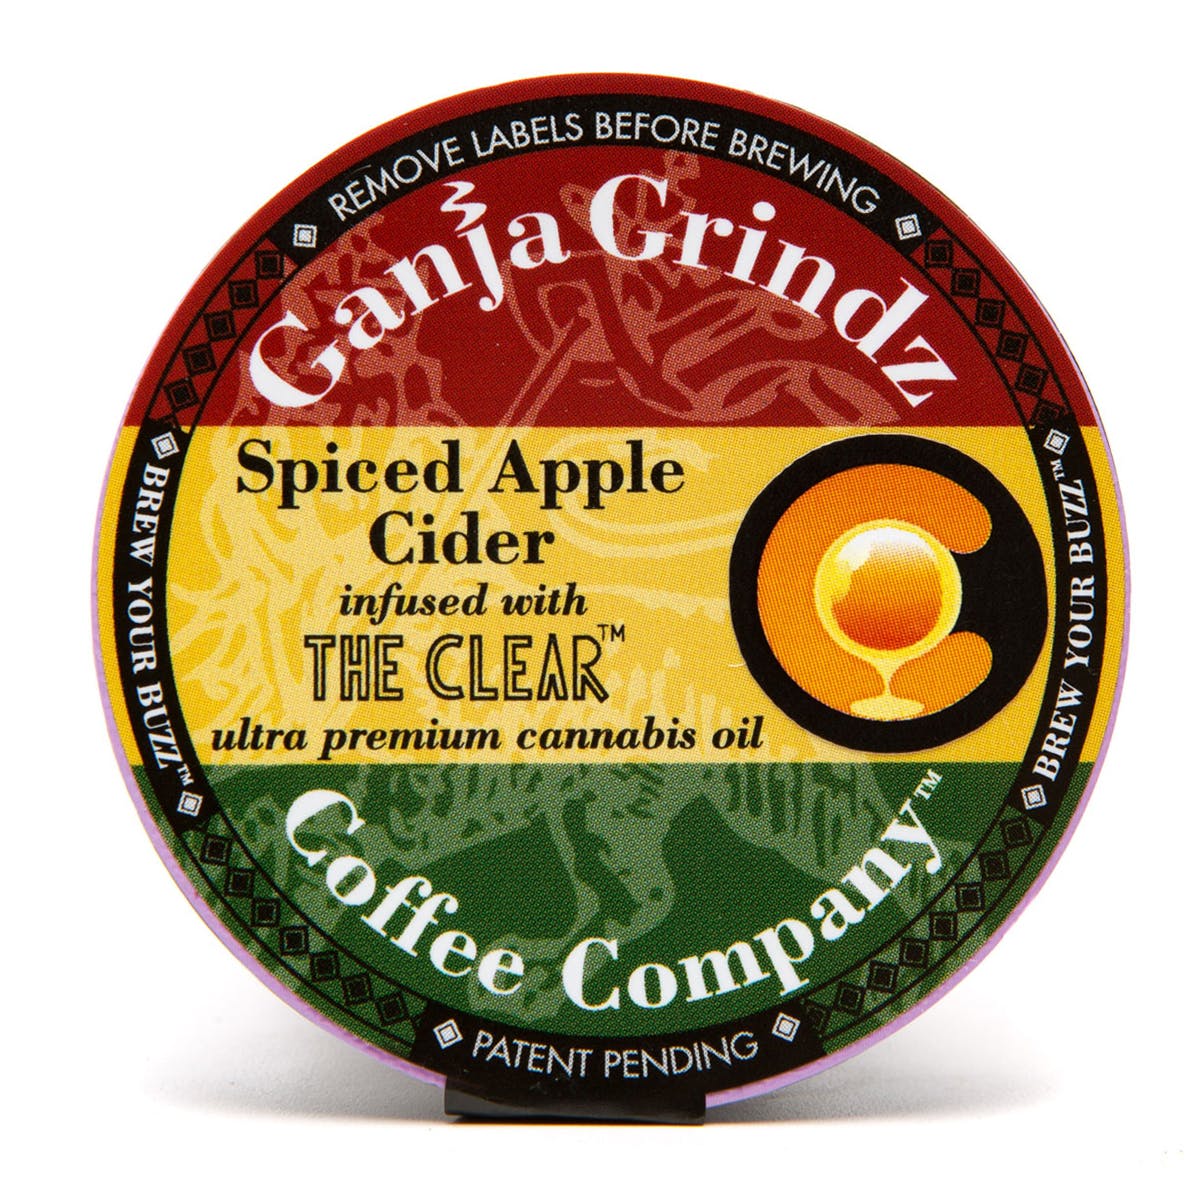 edible-spiced-apple-cider-cup-2c-25mg